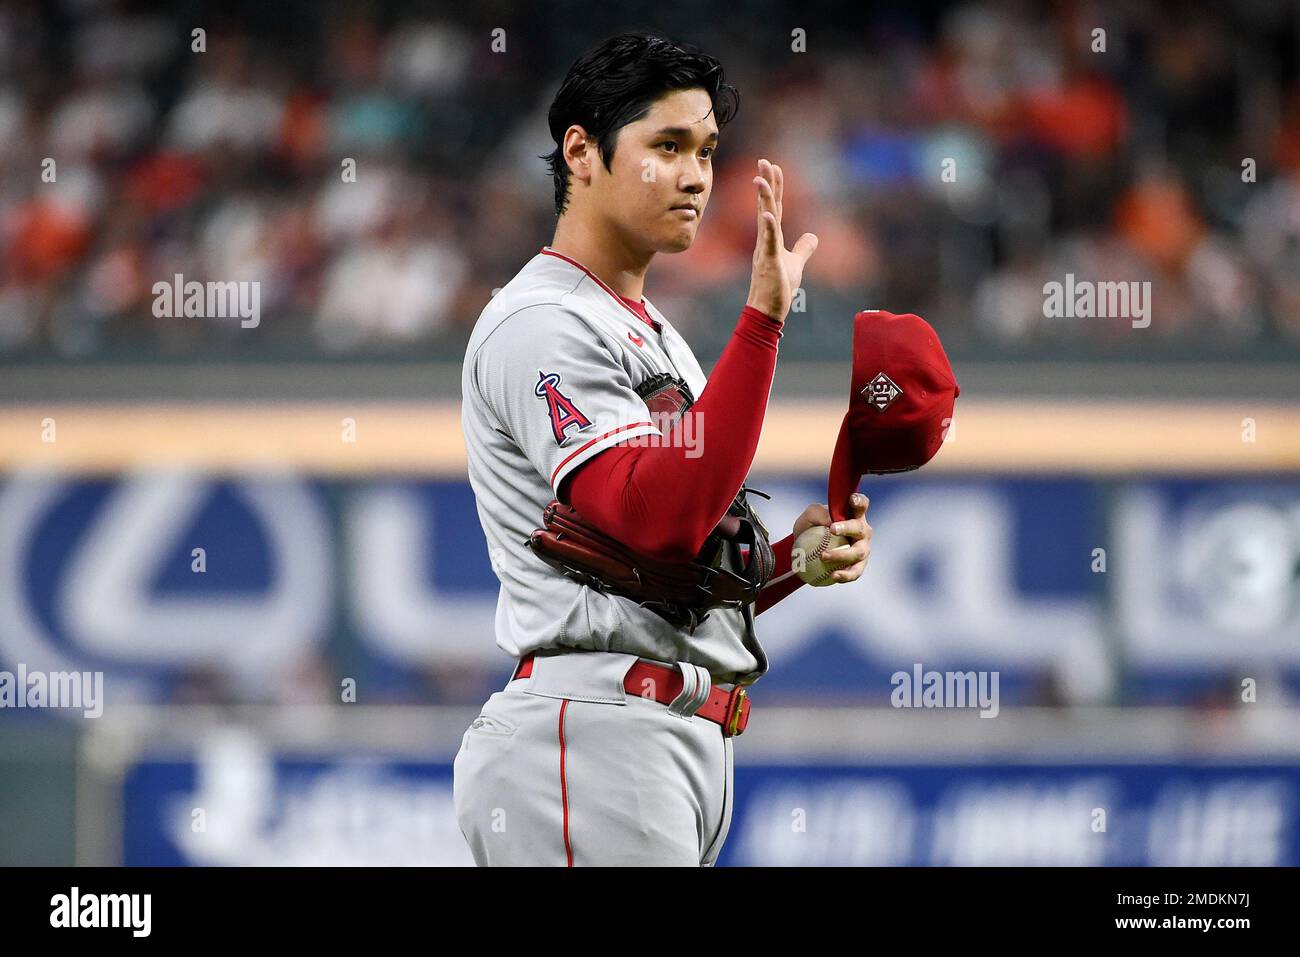 Los Angeles Angels starting pitcher Shohei Ohtani signals to catcher Kurt  Suzuki during the first inning of a baseball game against the Houston  Astros, Friday, Sept. 10, 2021, in Houston. (AP Photo/Eric